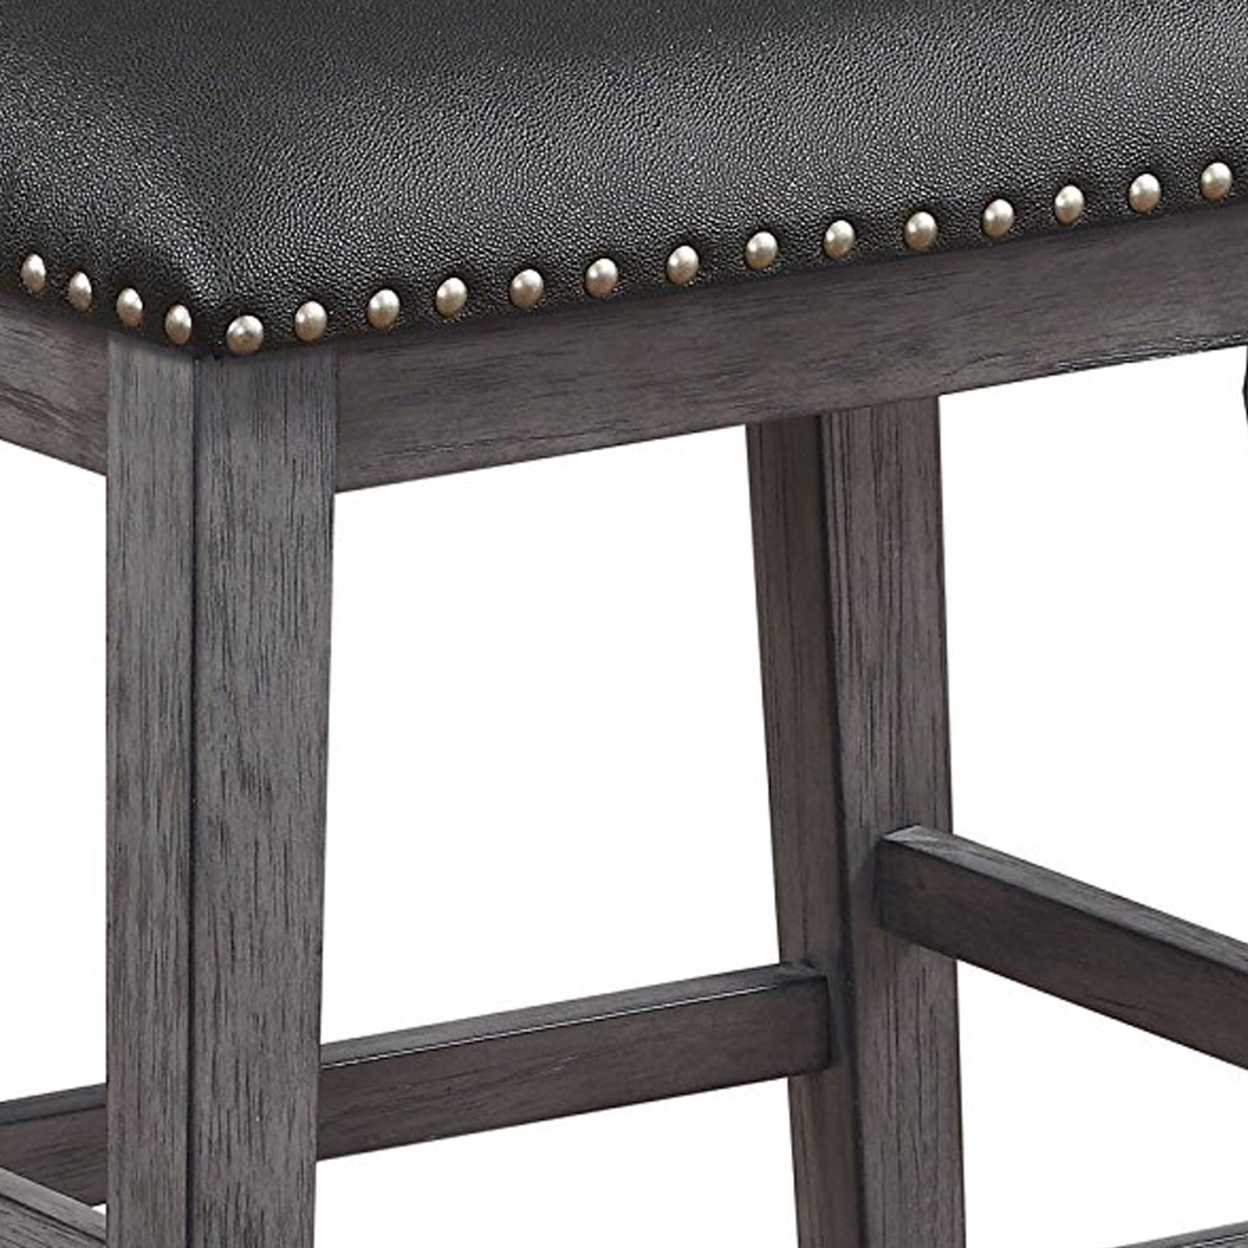 Wood & Leather CoUnter Height Stool With Nail Head Trim, Set Of 2, Black & Gray- Saltoro Sherpi